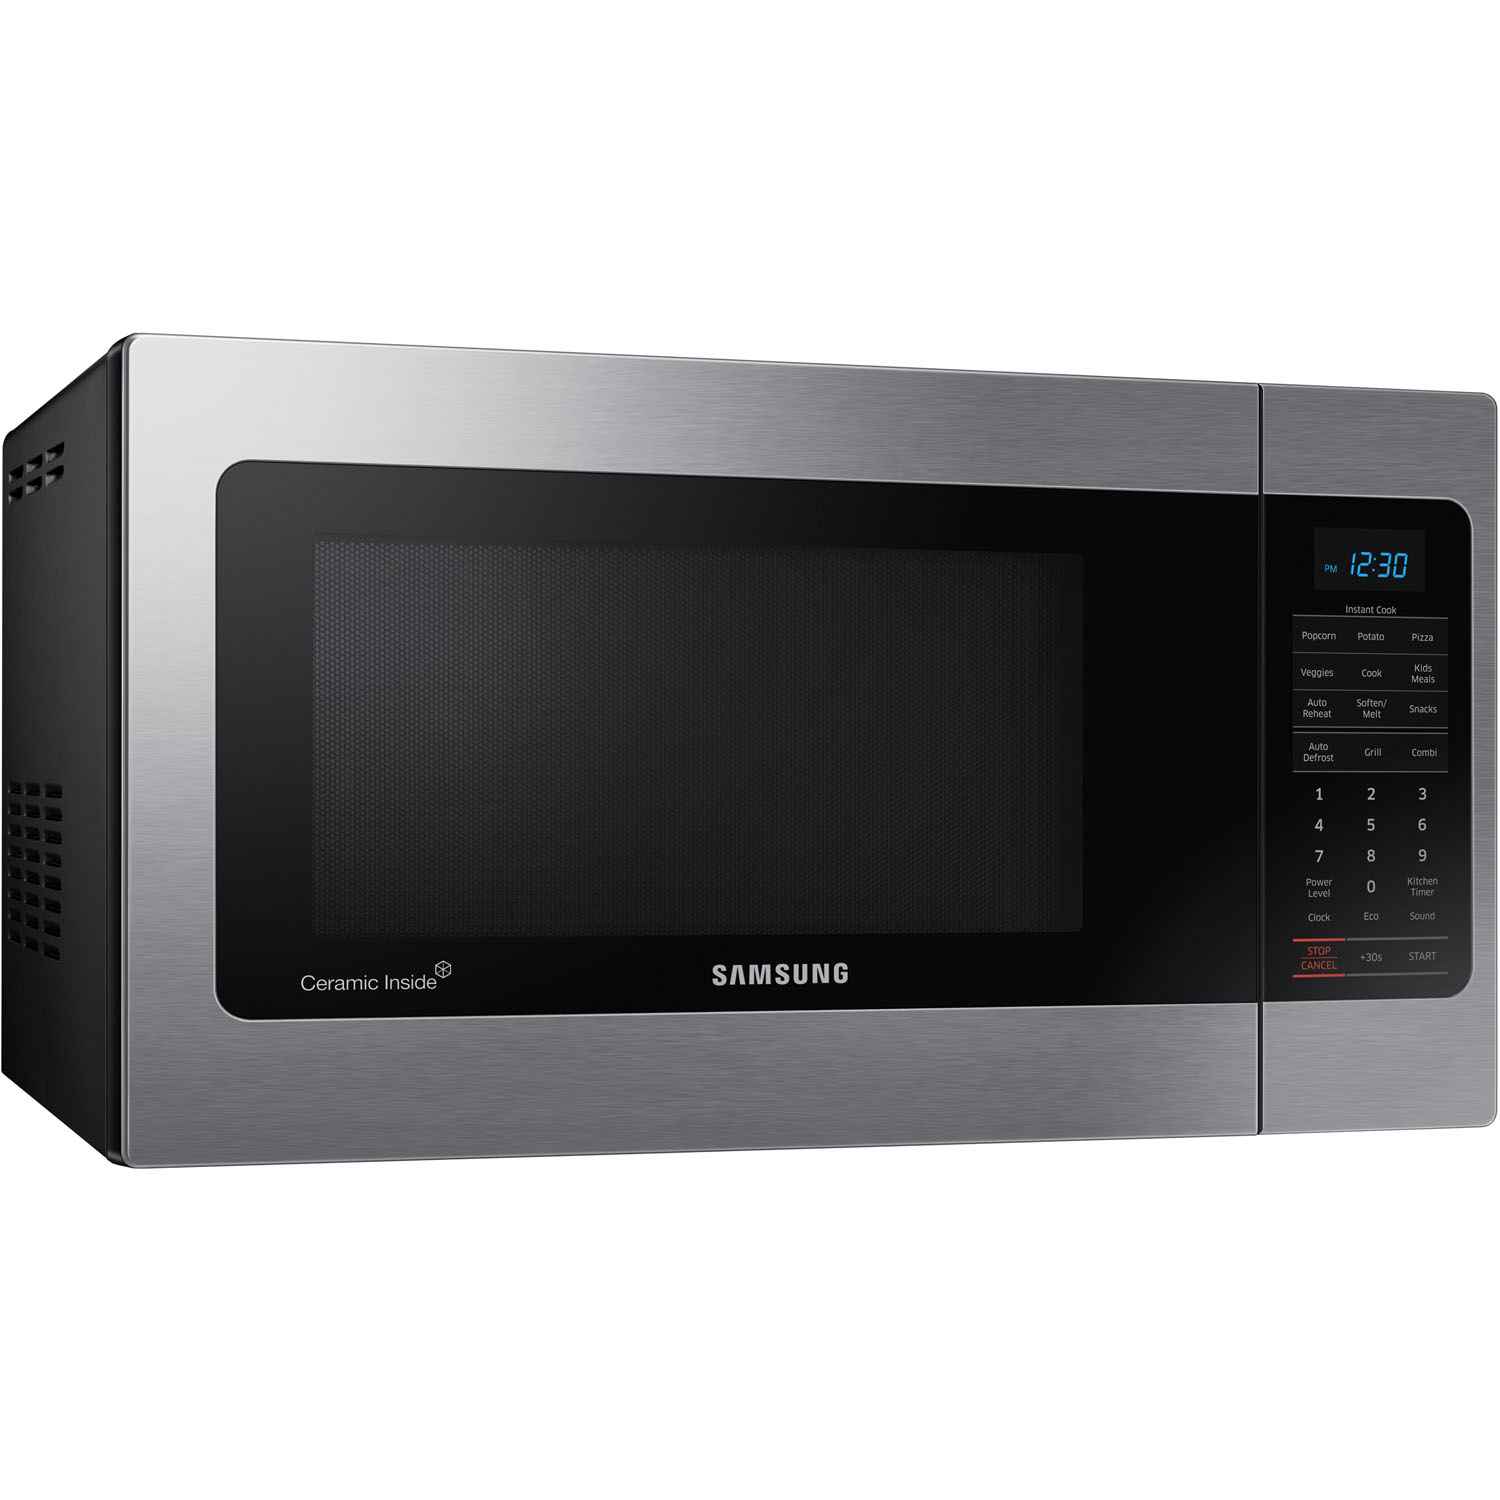 Samsung 1.1 cu. ft. Counter Top Microwave - Stainless Steel - image 4 of 6